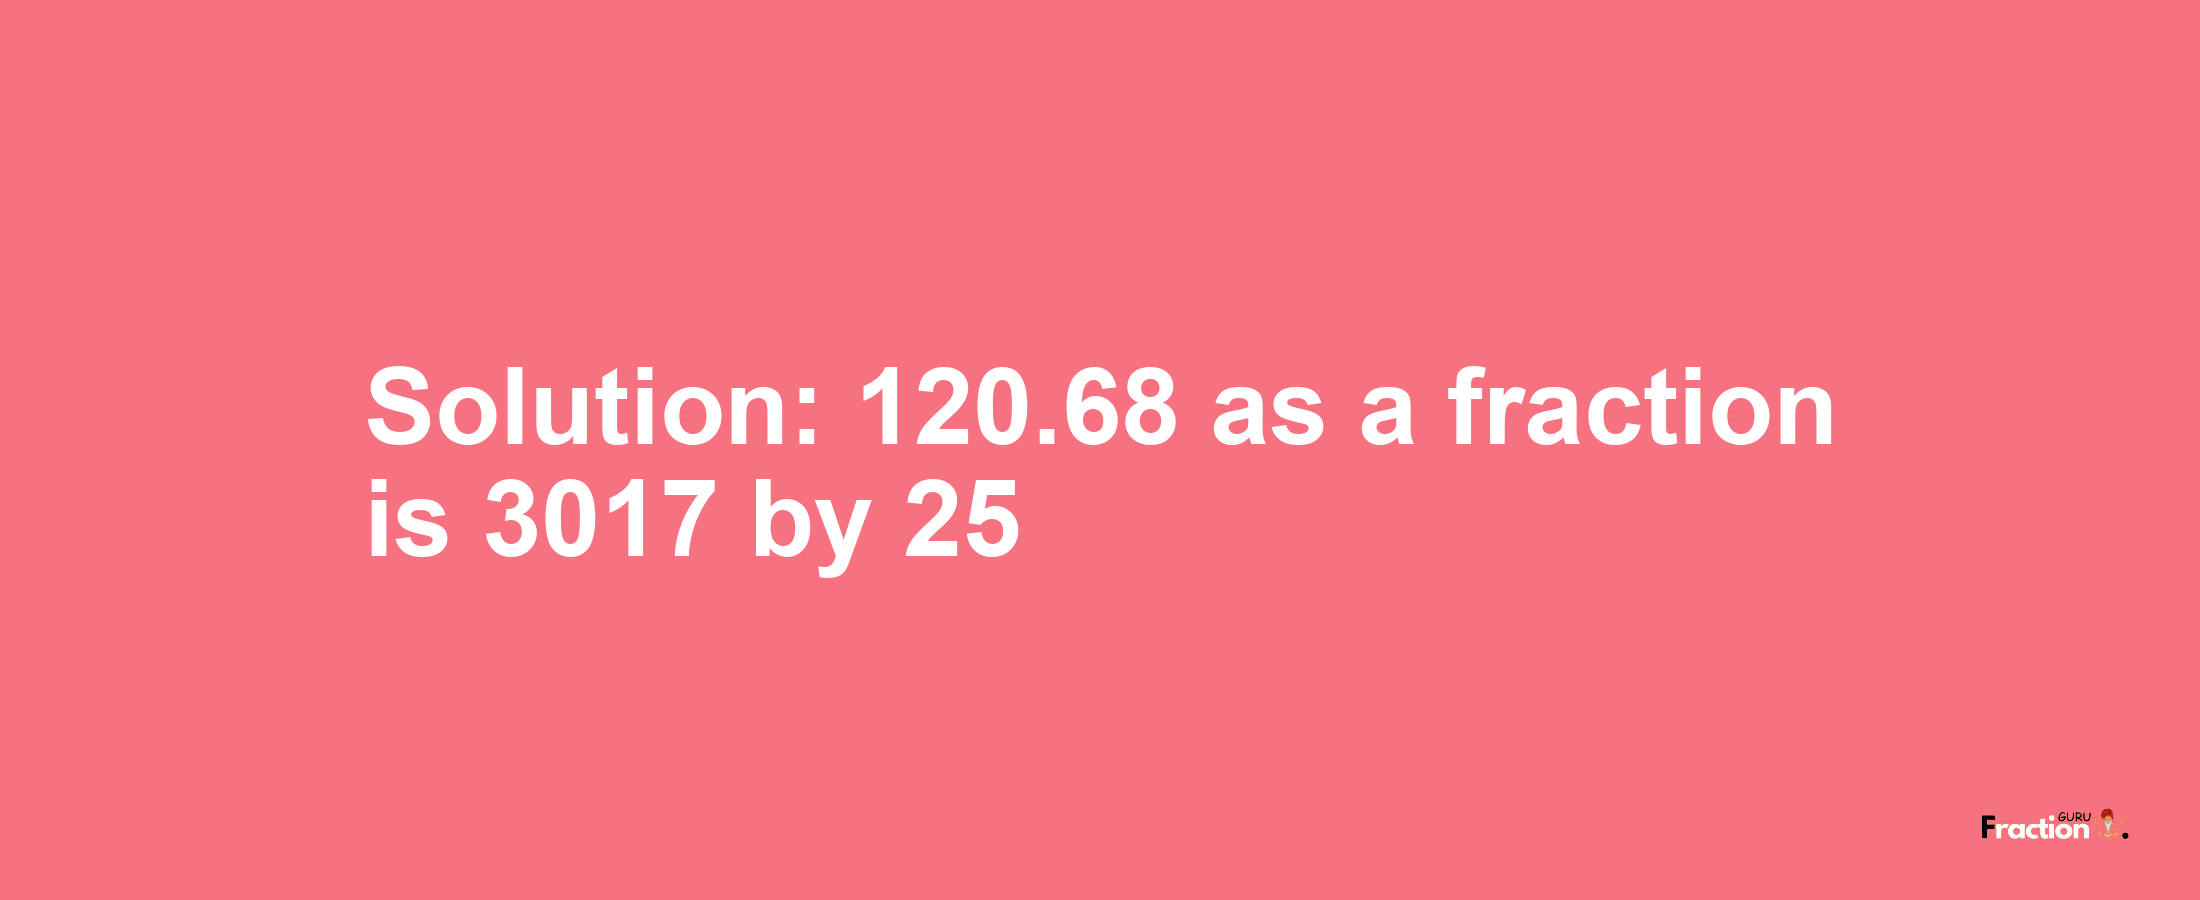 Solution:120.68 as a fraction is 3017/25